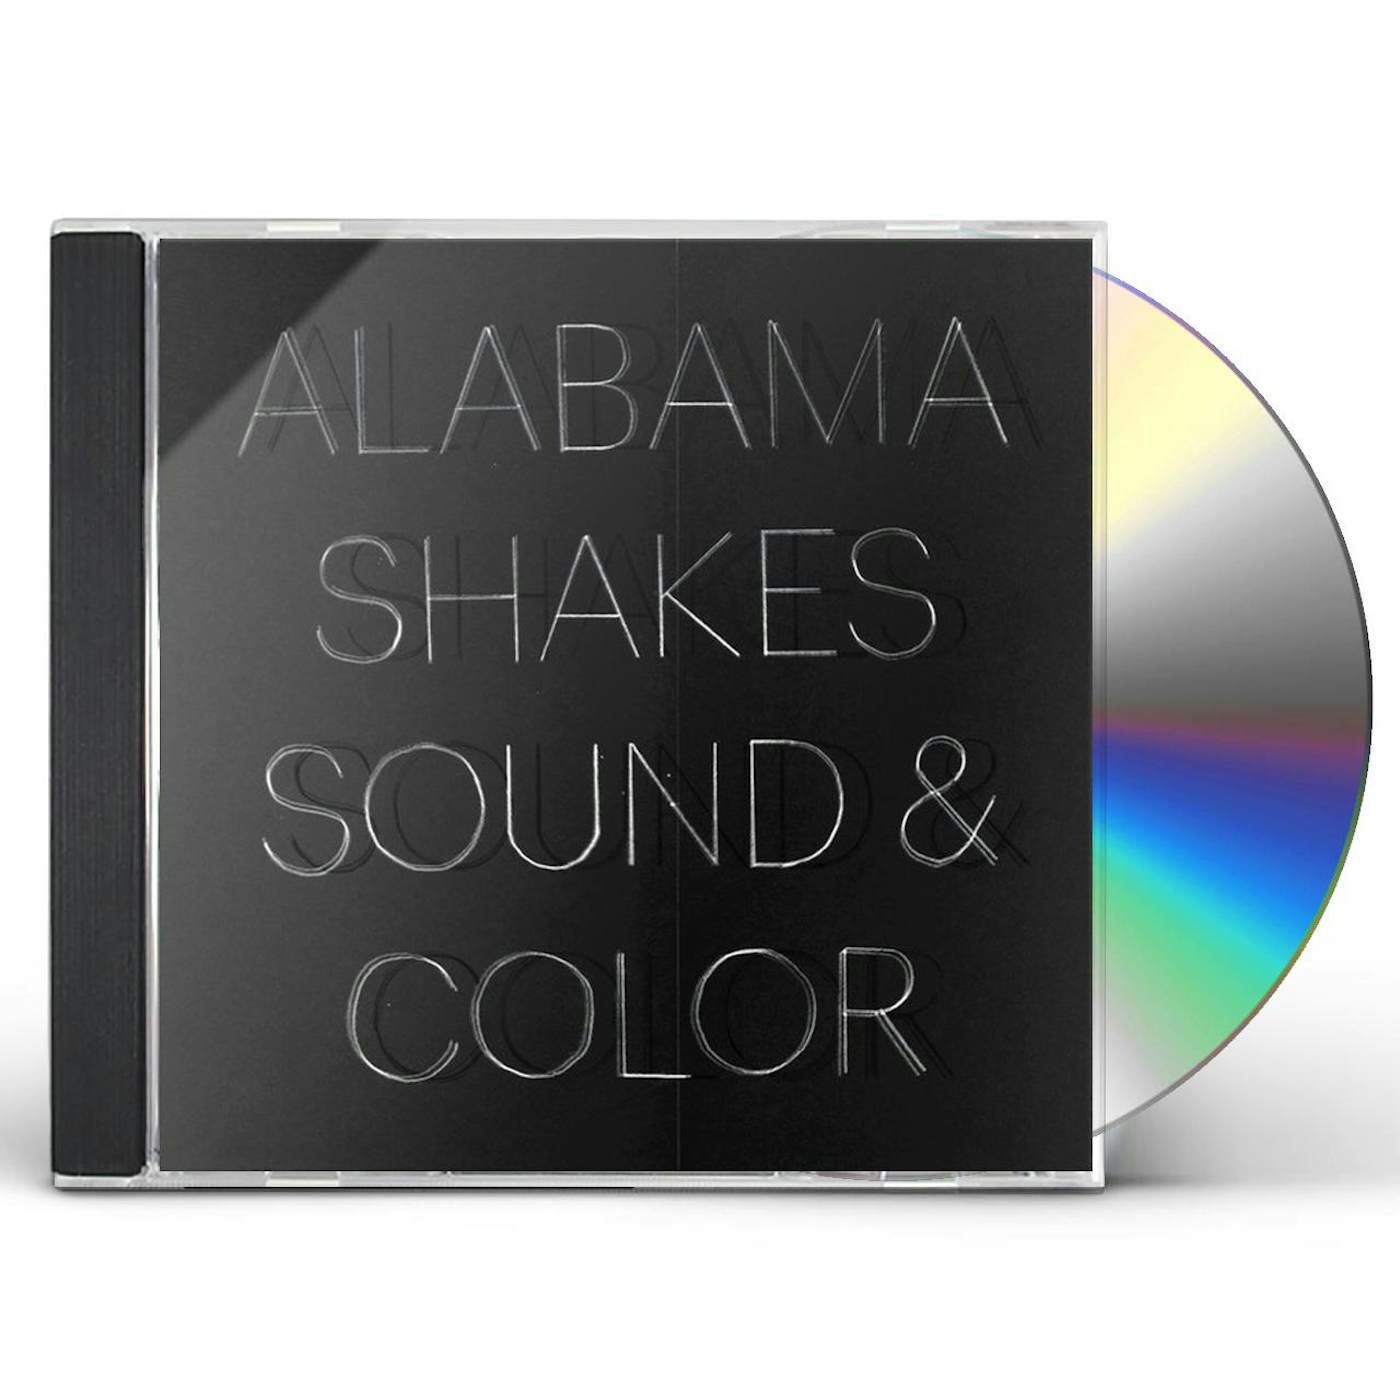 Alabama Shakes SOUND & COLOR (DELUXE EDITION) CD